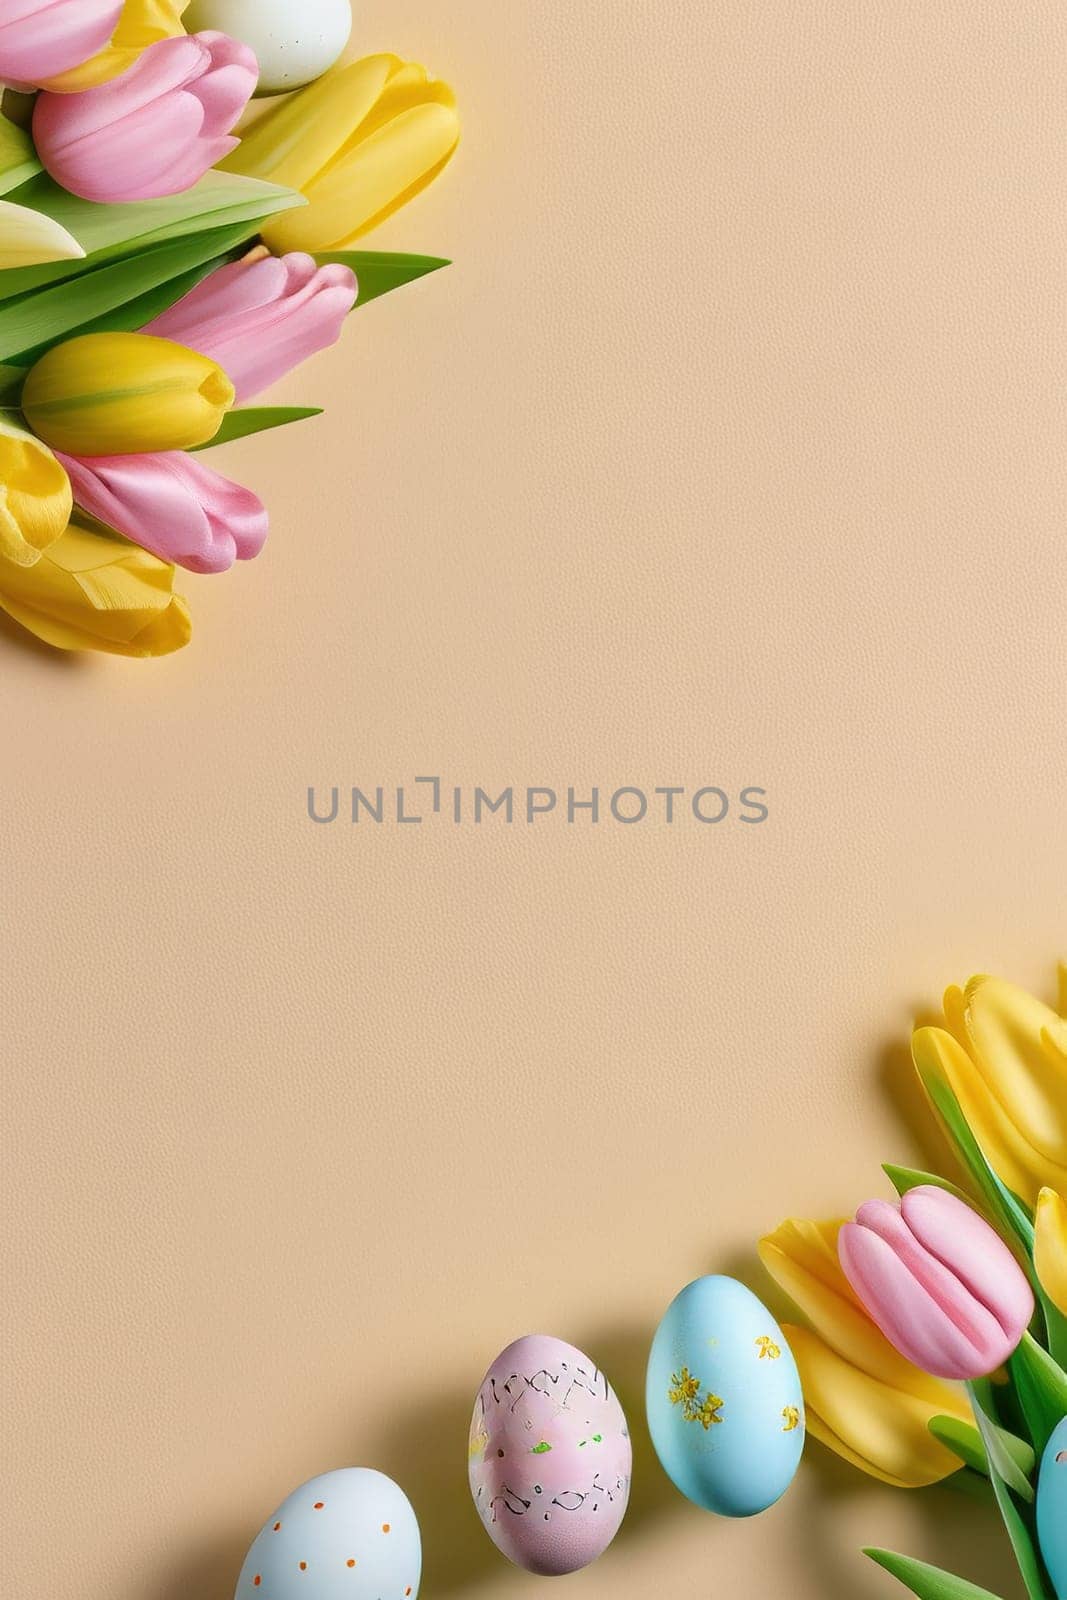 Colorful tulips and eggs lying on teal beige background with copy space by EkaterinaPereslavtseva